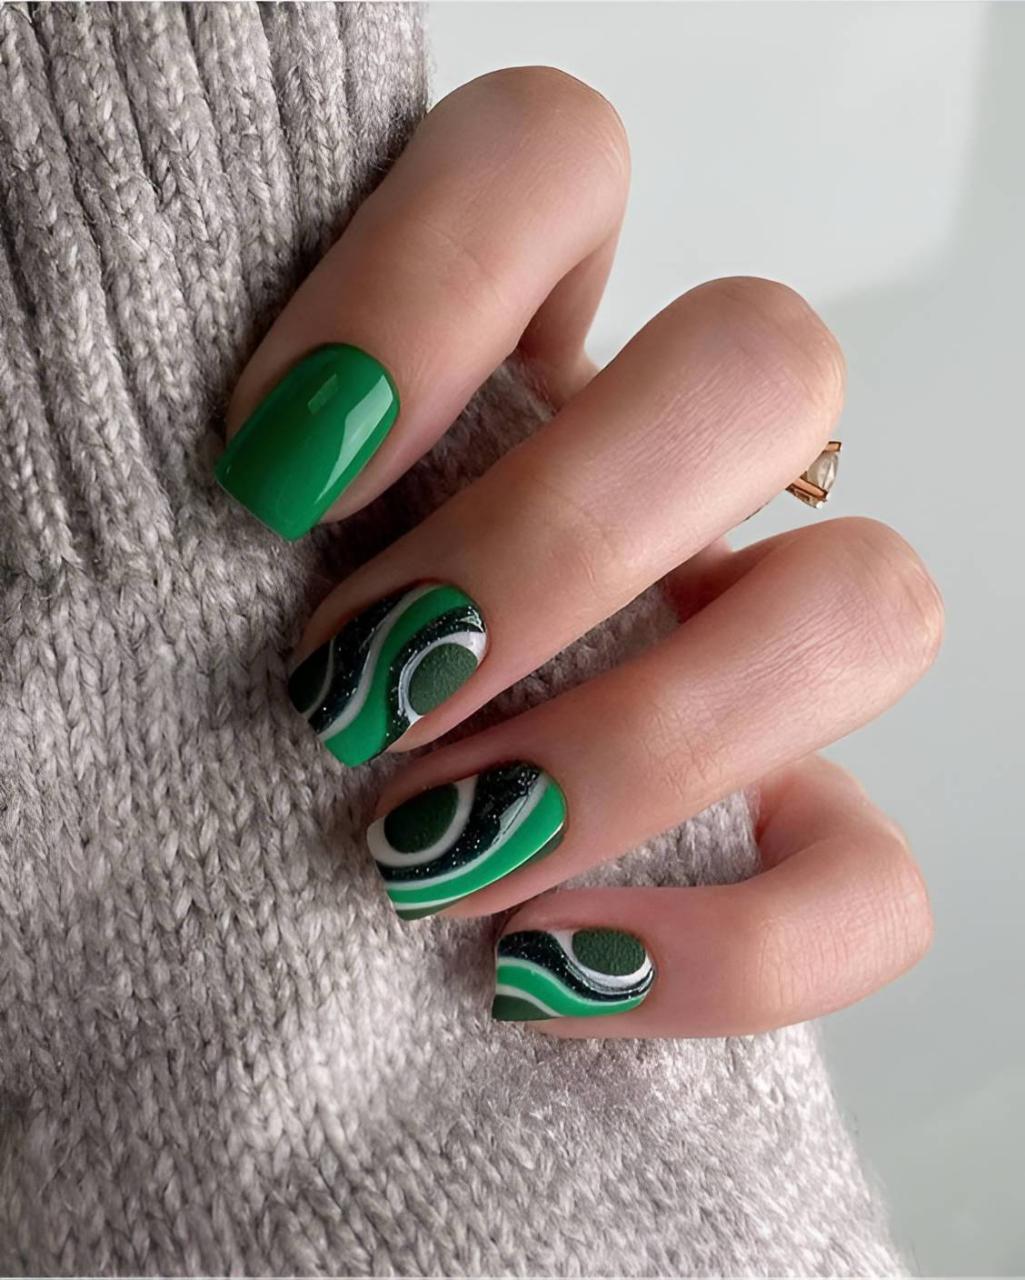 30 Fabulous Swirl Nail Designs So Easy To Copy - 215